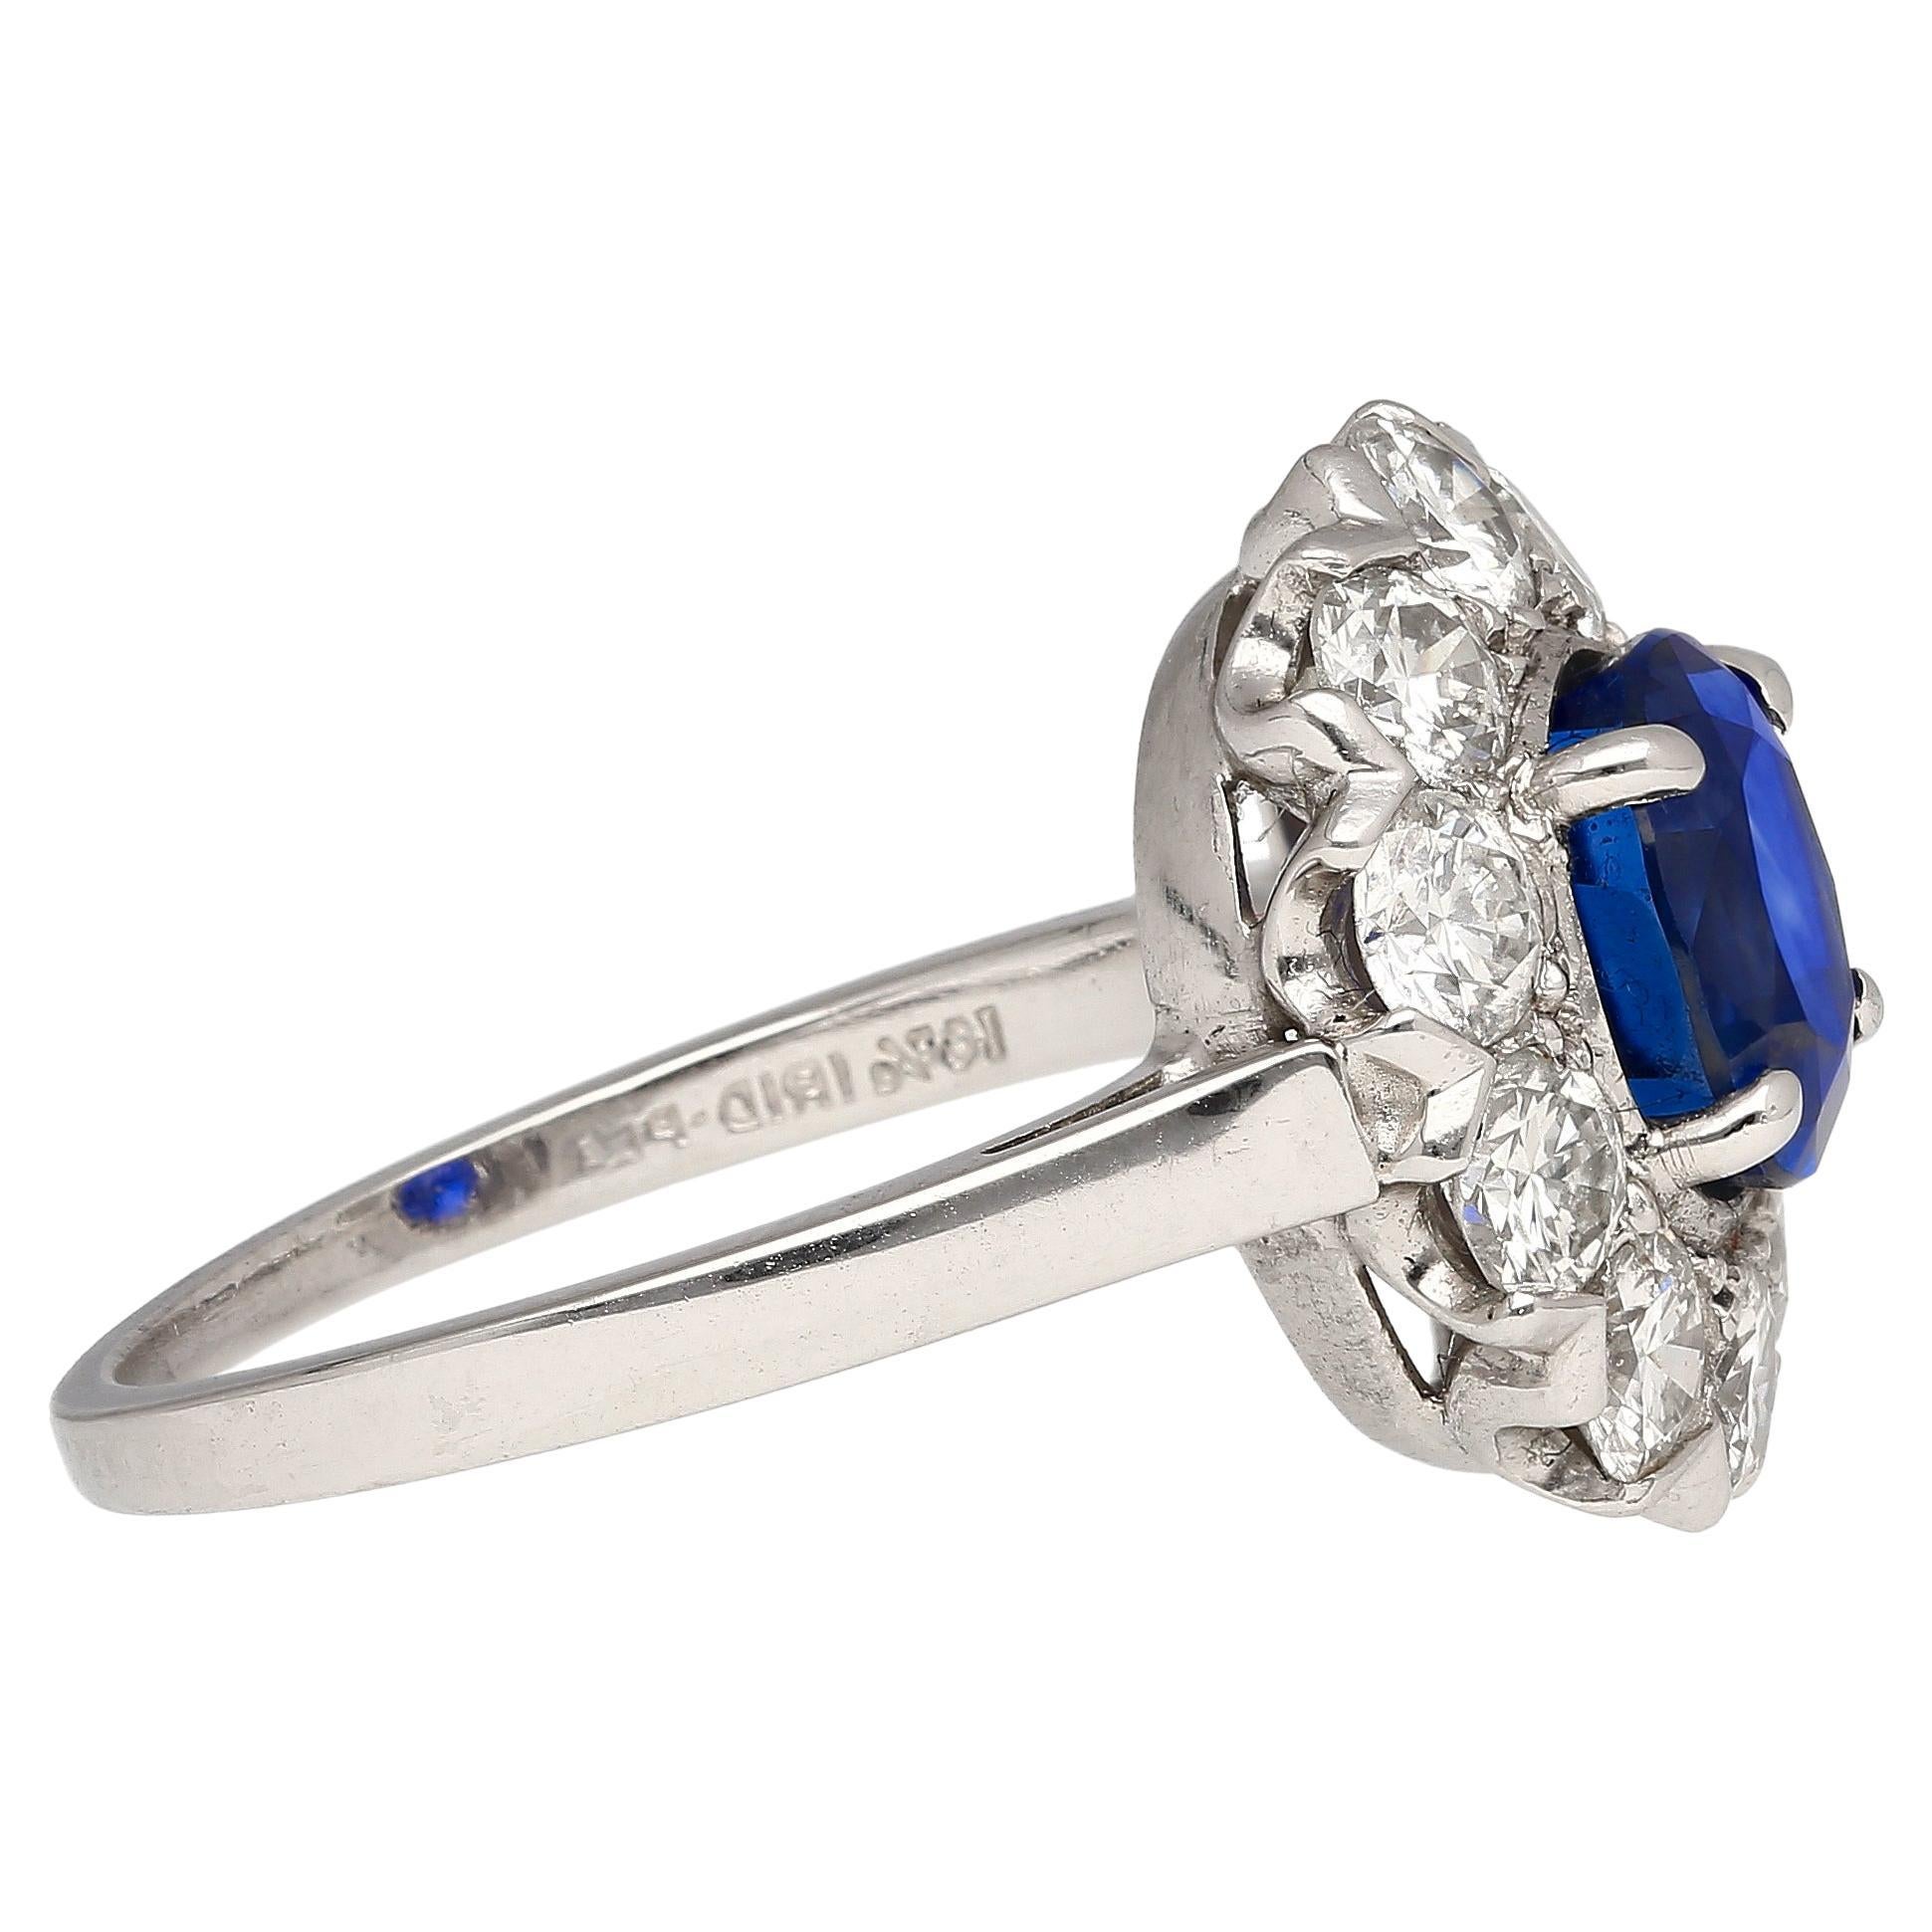 Vintage 1.88 carat Madagascar origin oval cut Blue Sapphire and Diamond halo ring. Set in platinum 900. Circa 1940, likely from the Art Deco to Retro Era. Adorned with a 10 round-cut diamond halo. A ring that exudes opulence and refinement. The